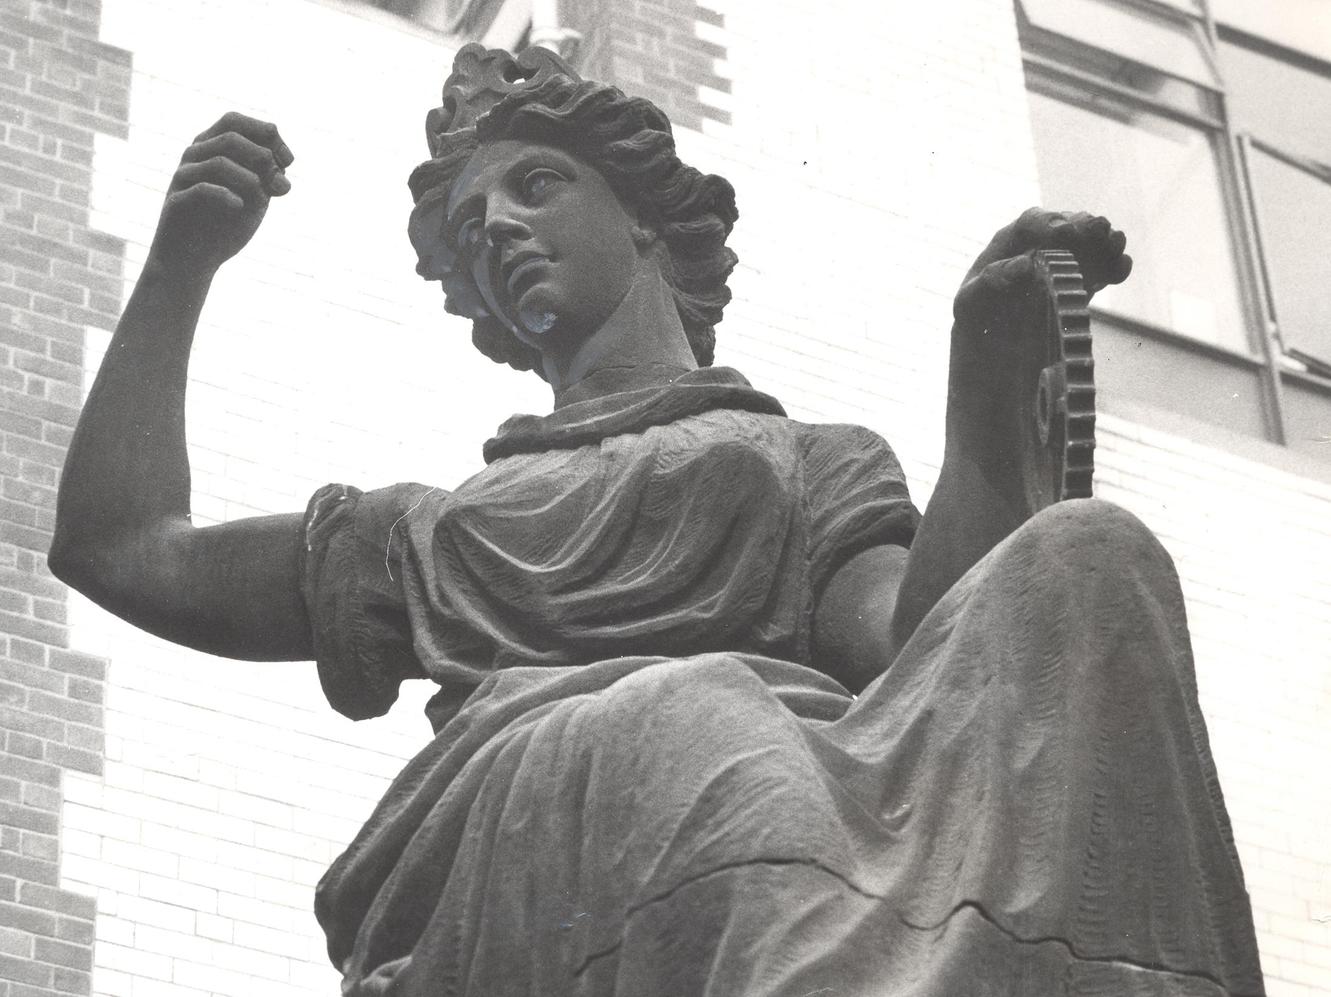 A statue on Park Row in Leeds city centre which was threatened with being reduced to rubble in the late 1960s.